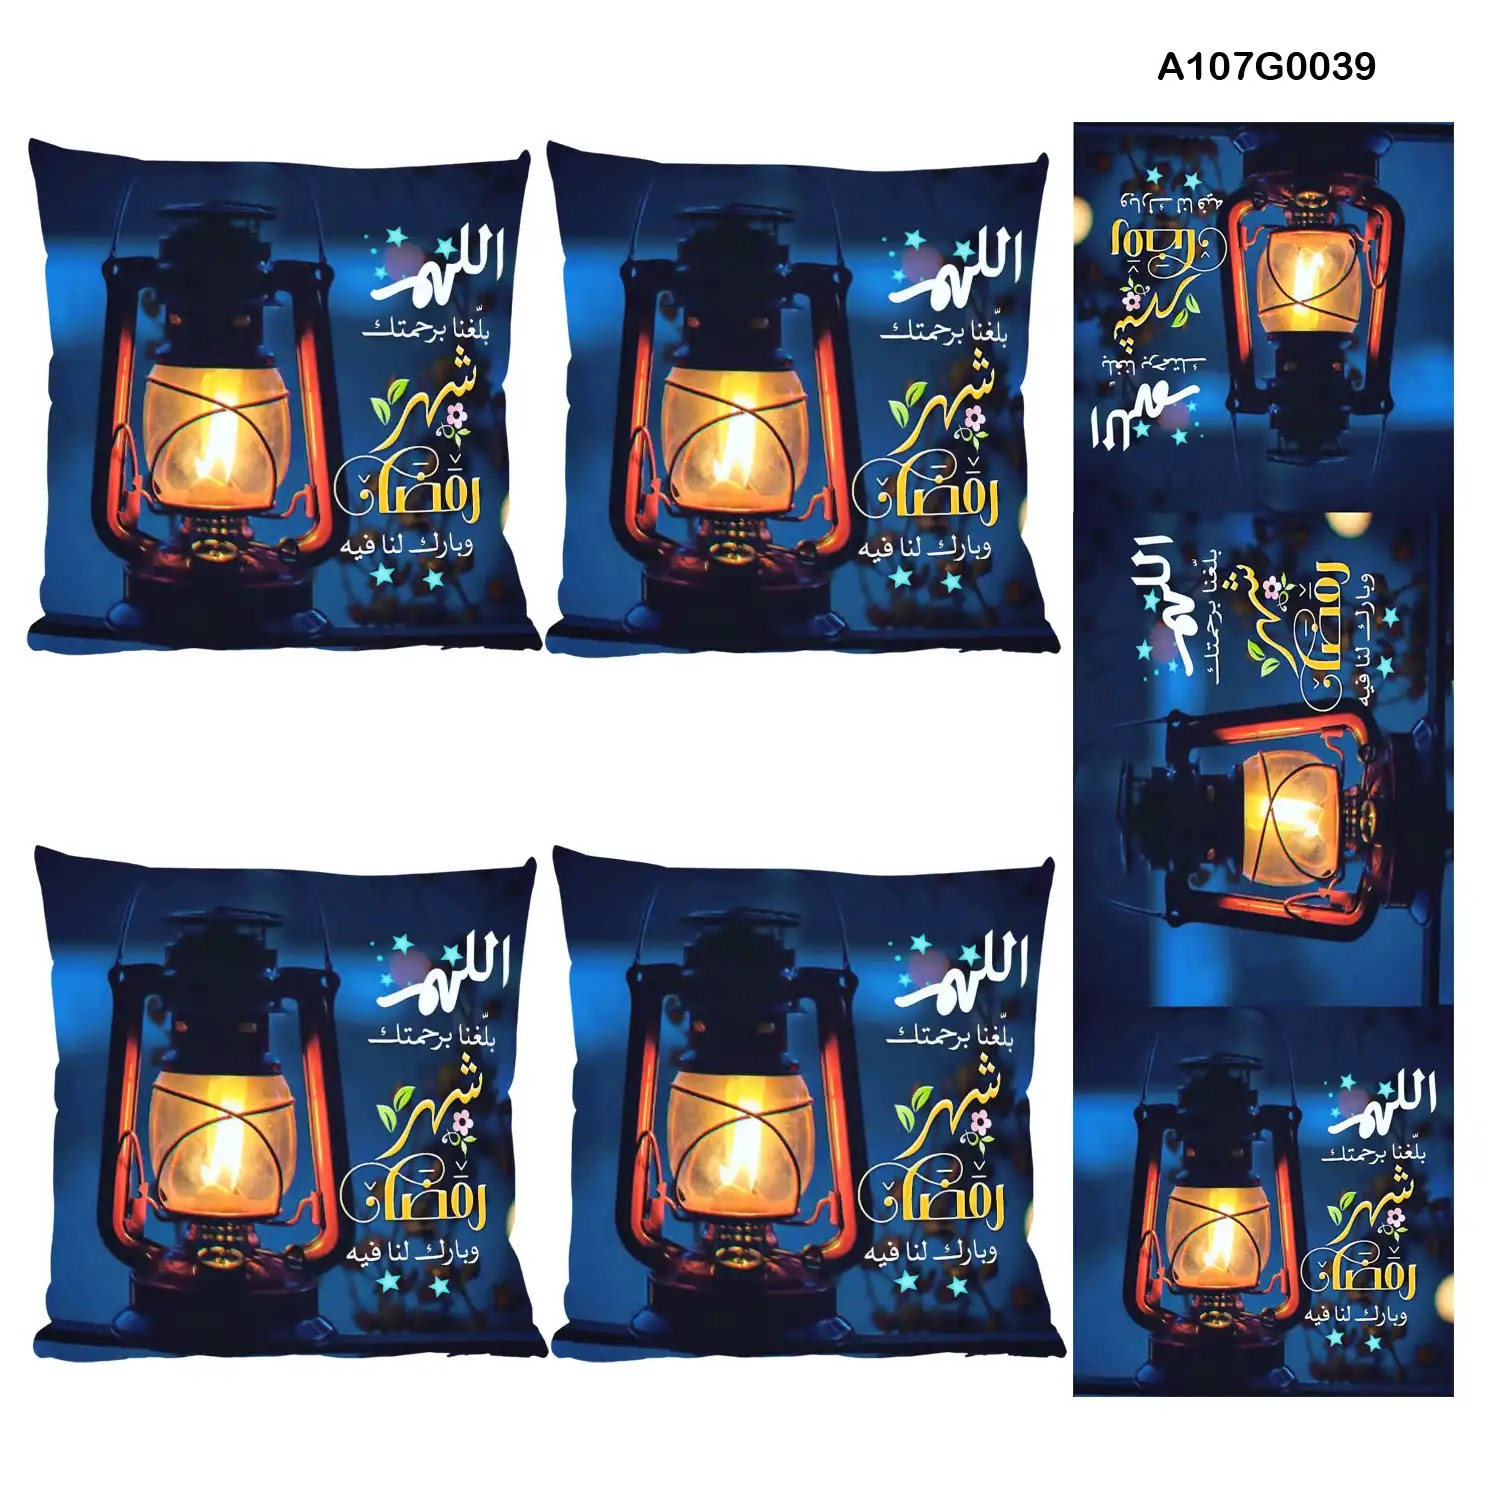 Navy Pillow cover set & table runner with Ramadan lantern drawing